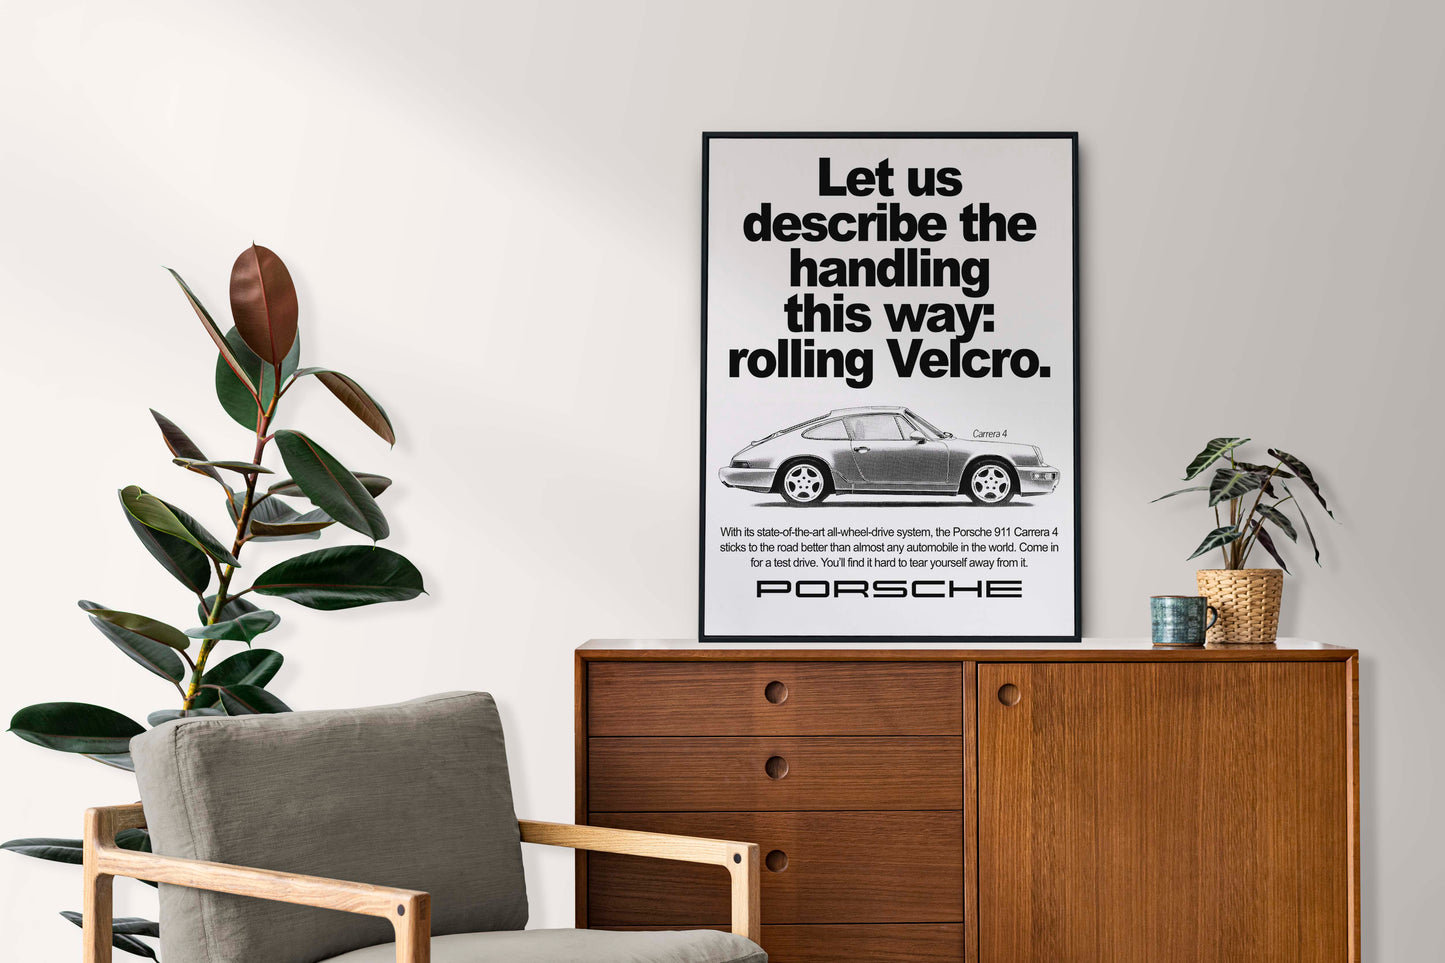 Porsche "Let Us Describe The Handling This Way: Rolling Velcro" Poster